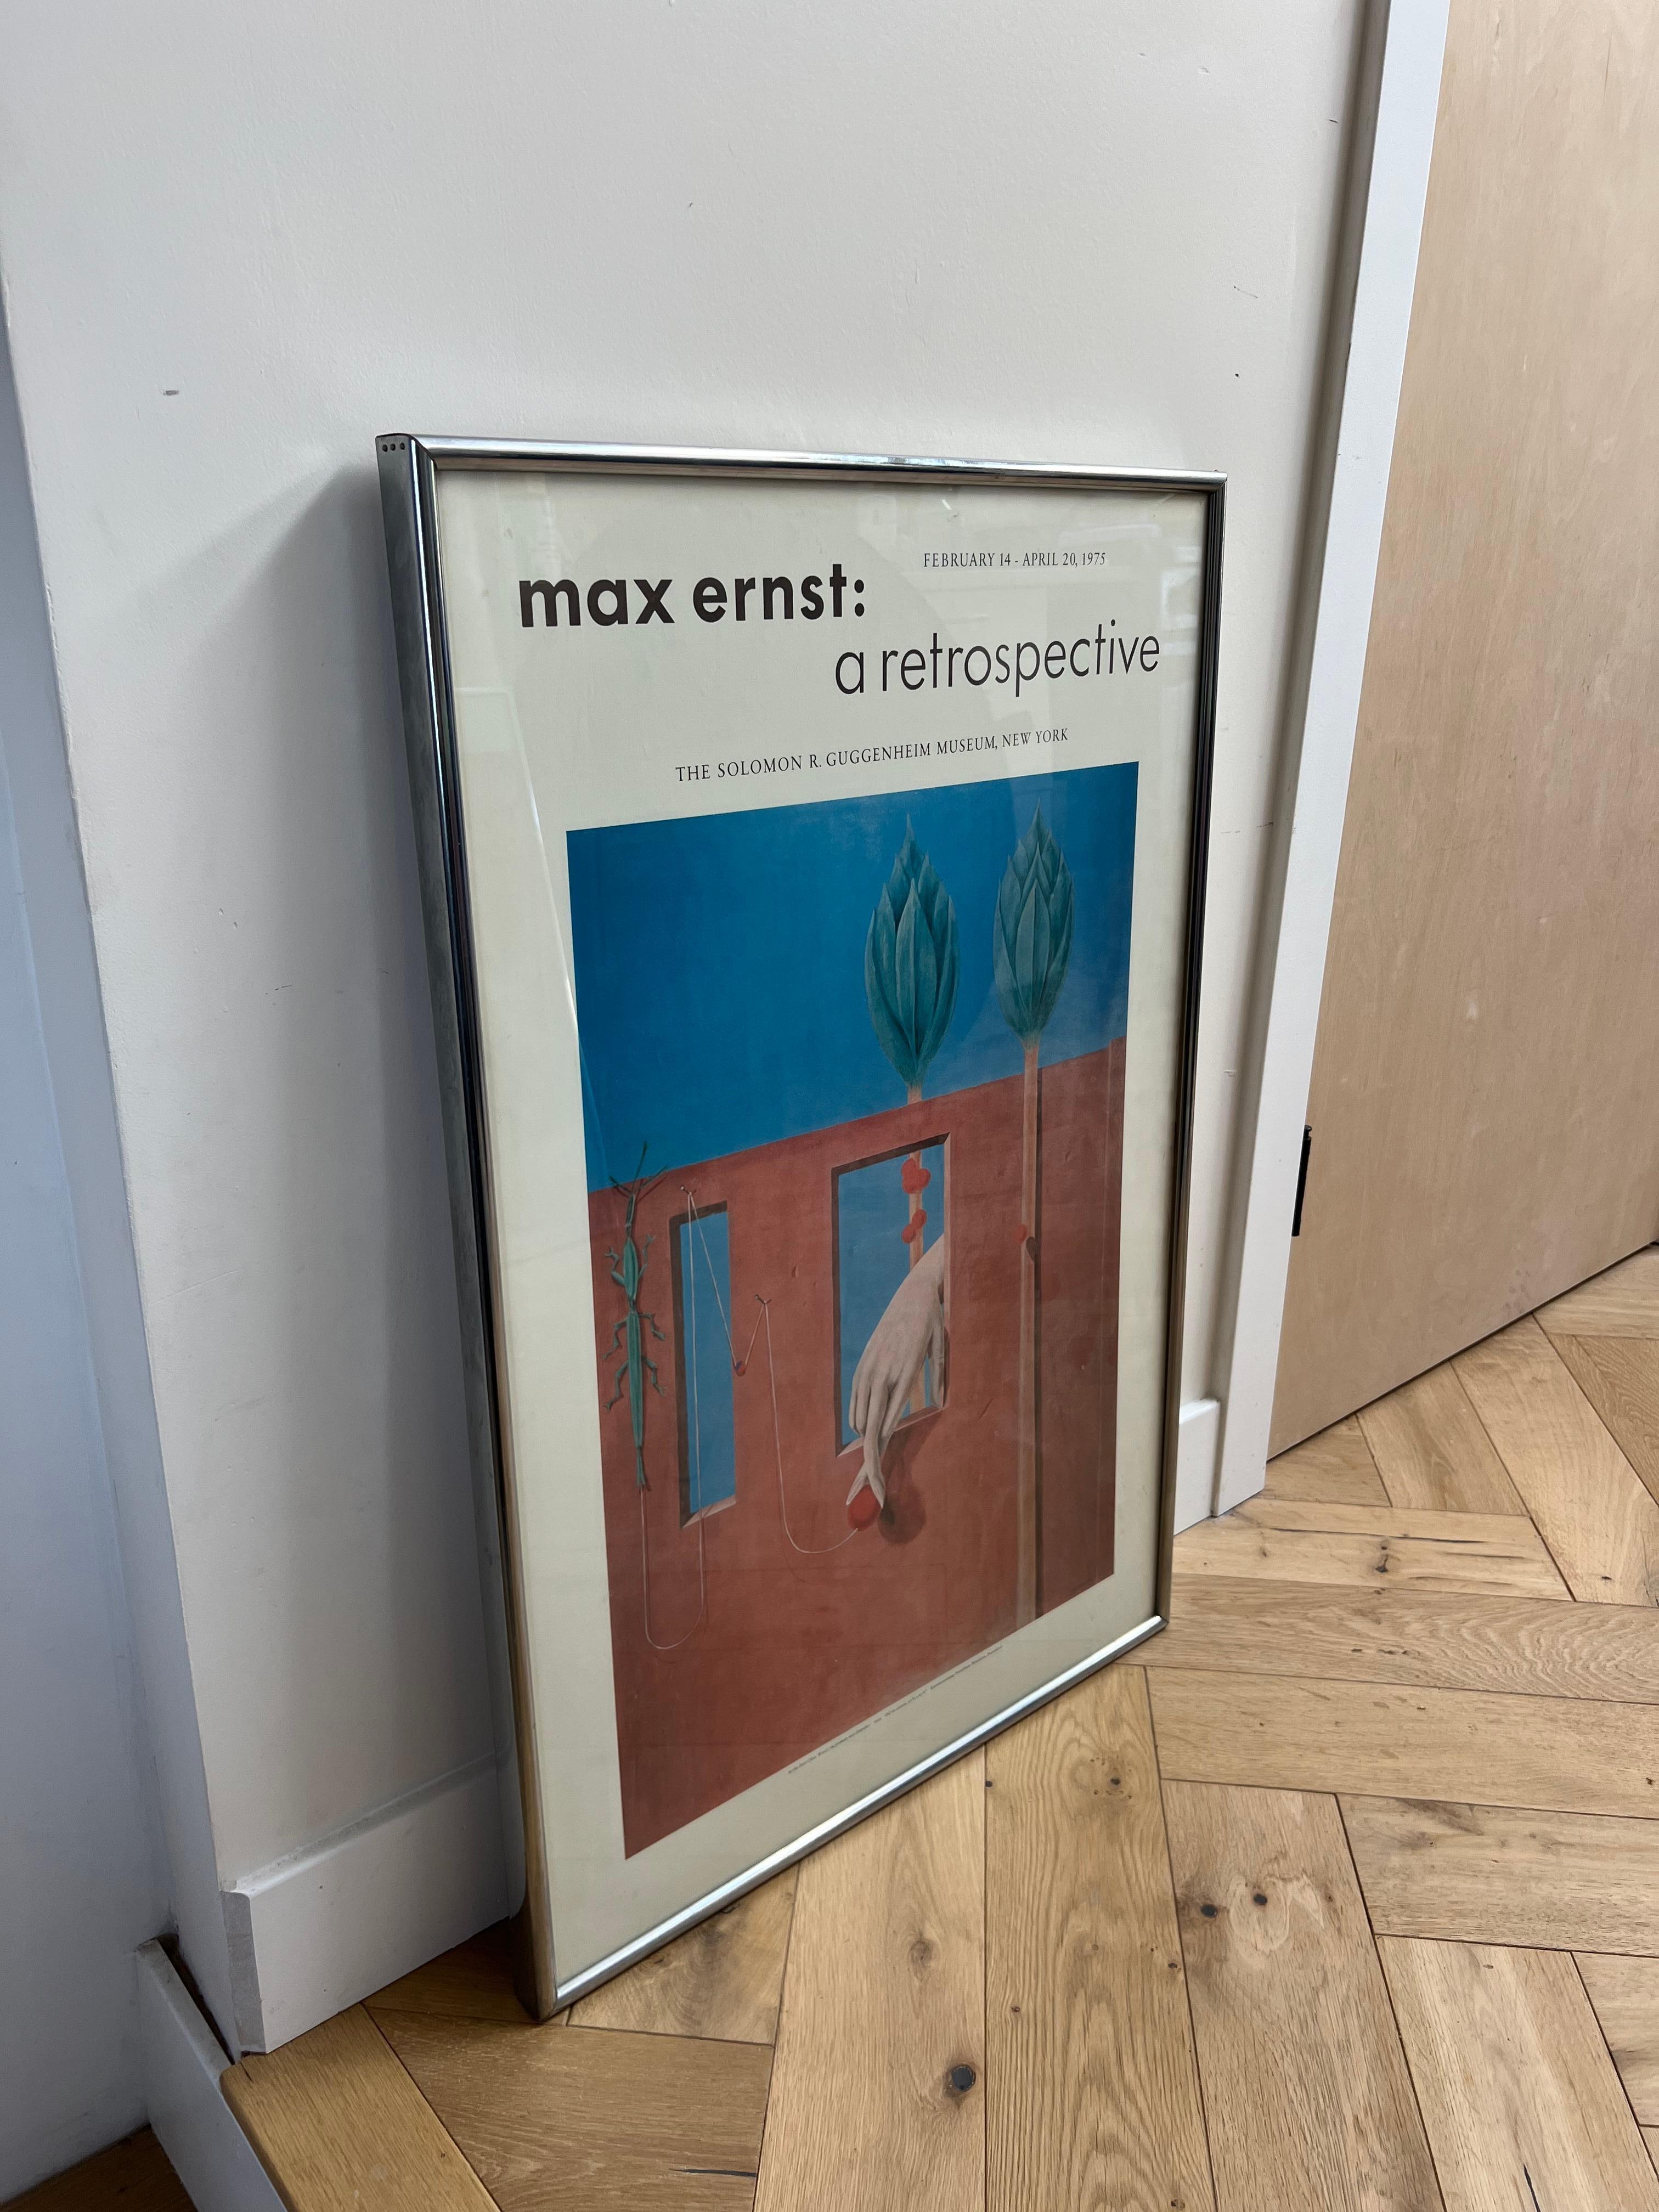 max ernst at the first clear word